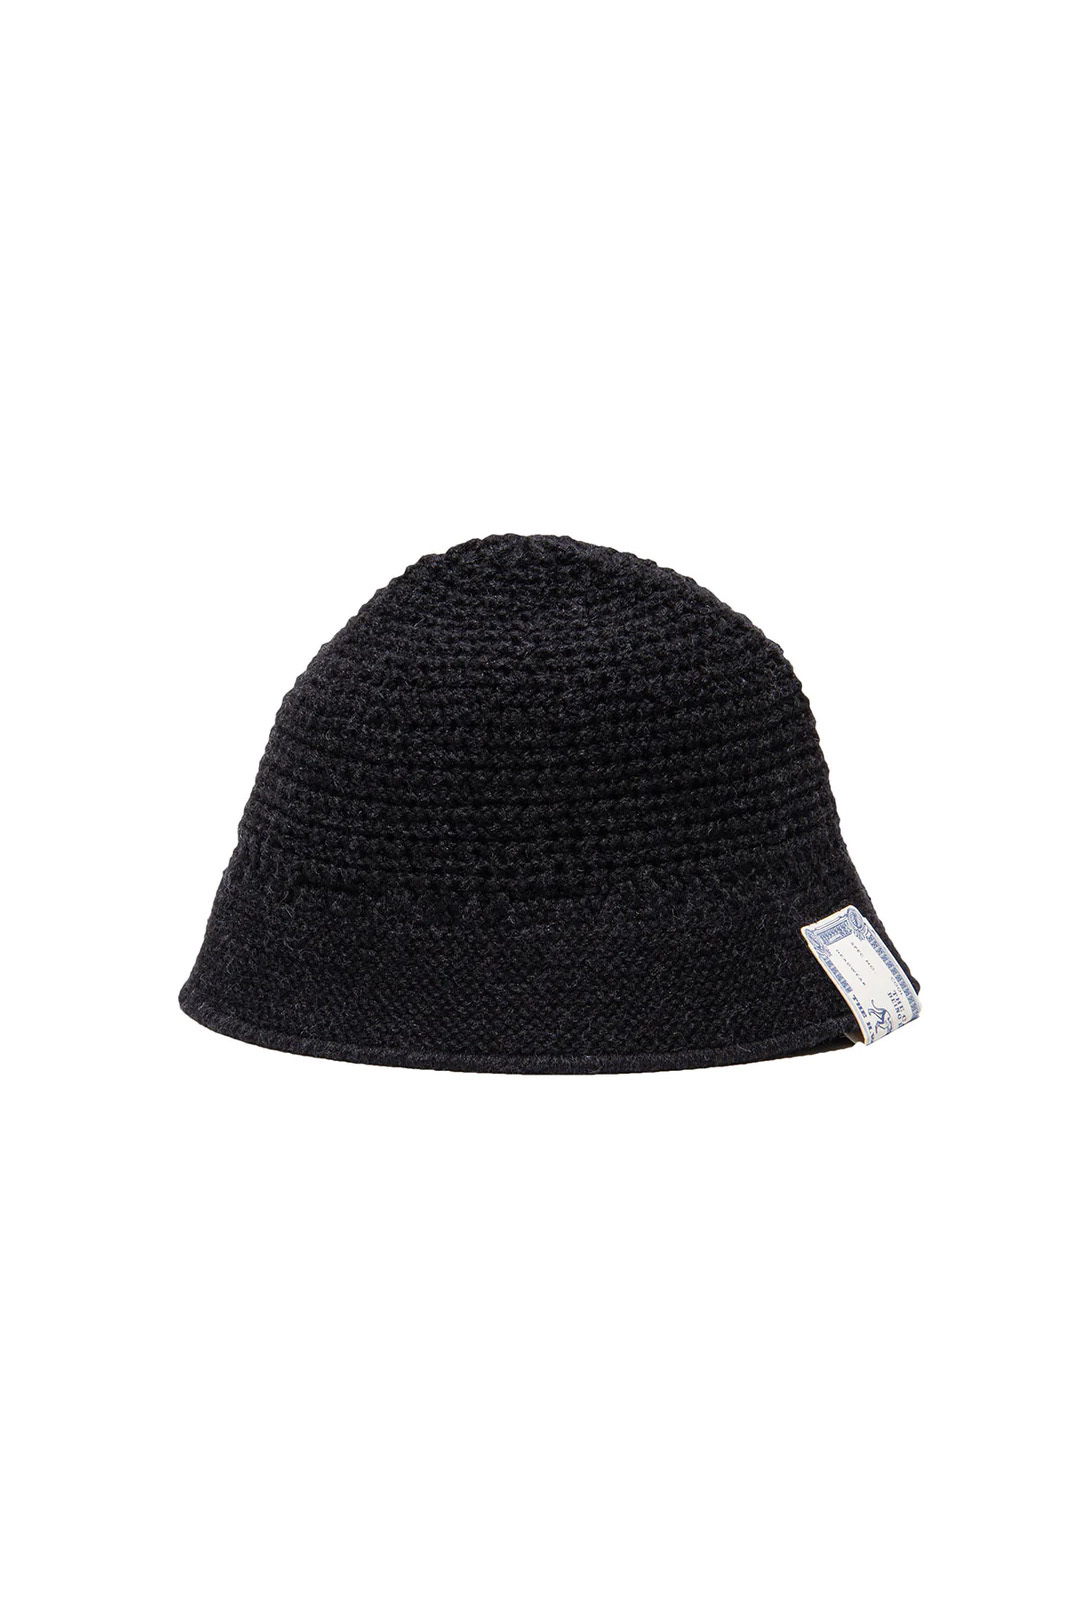 THE H.W DOG&CO WOOL KNIT HAT (3COL)